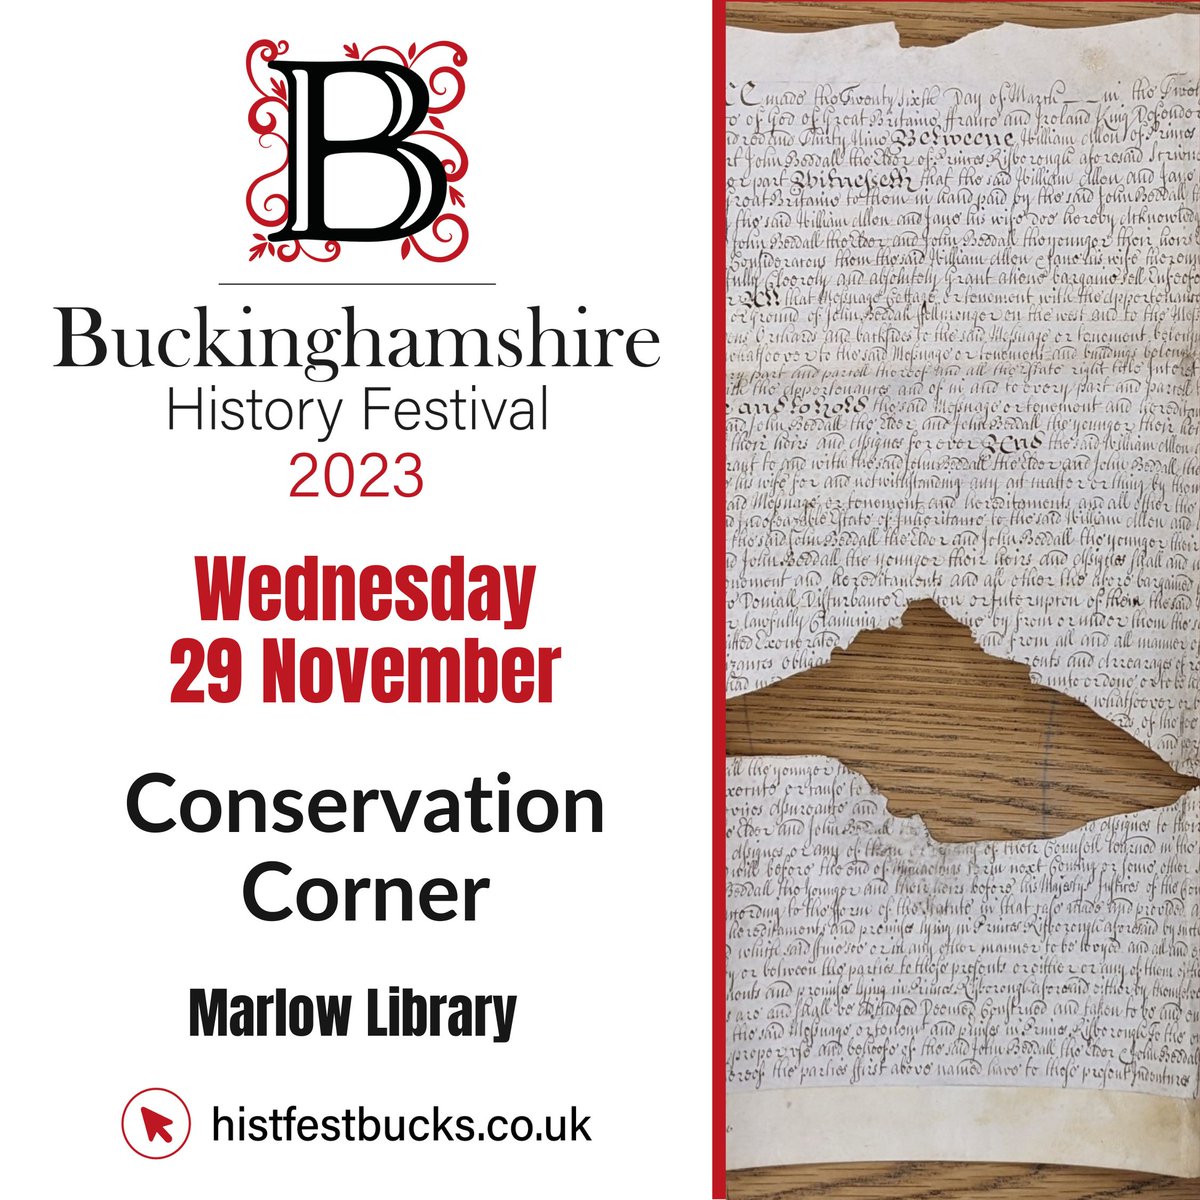 Do you have some old documents or photos that you'd like a professional look over? Our conservator will be at Marlow Library on Wednesday the 29th to give out advice on how to look after them! Head to histfestbucks.co.uk for more information.